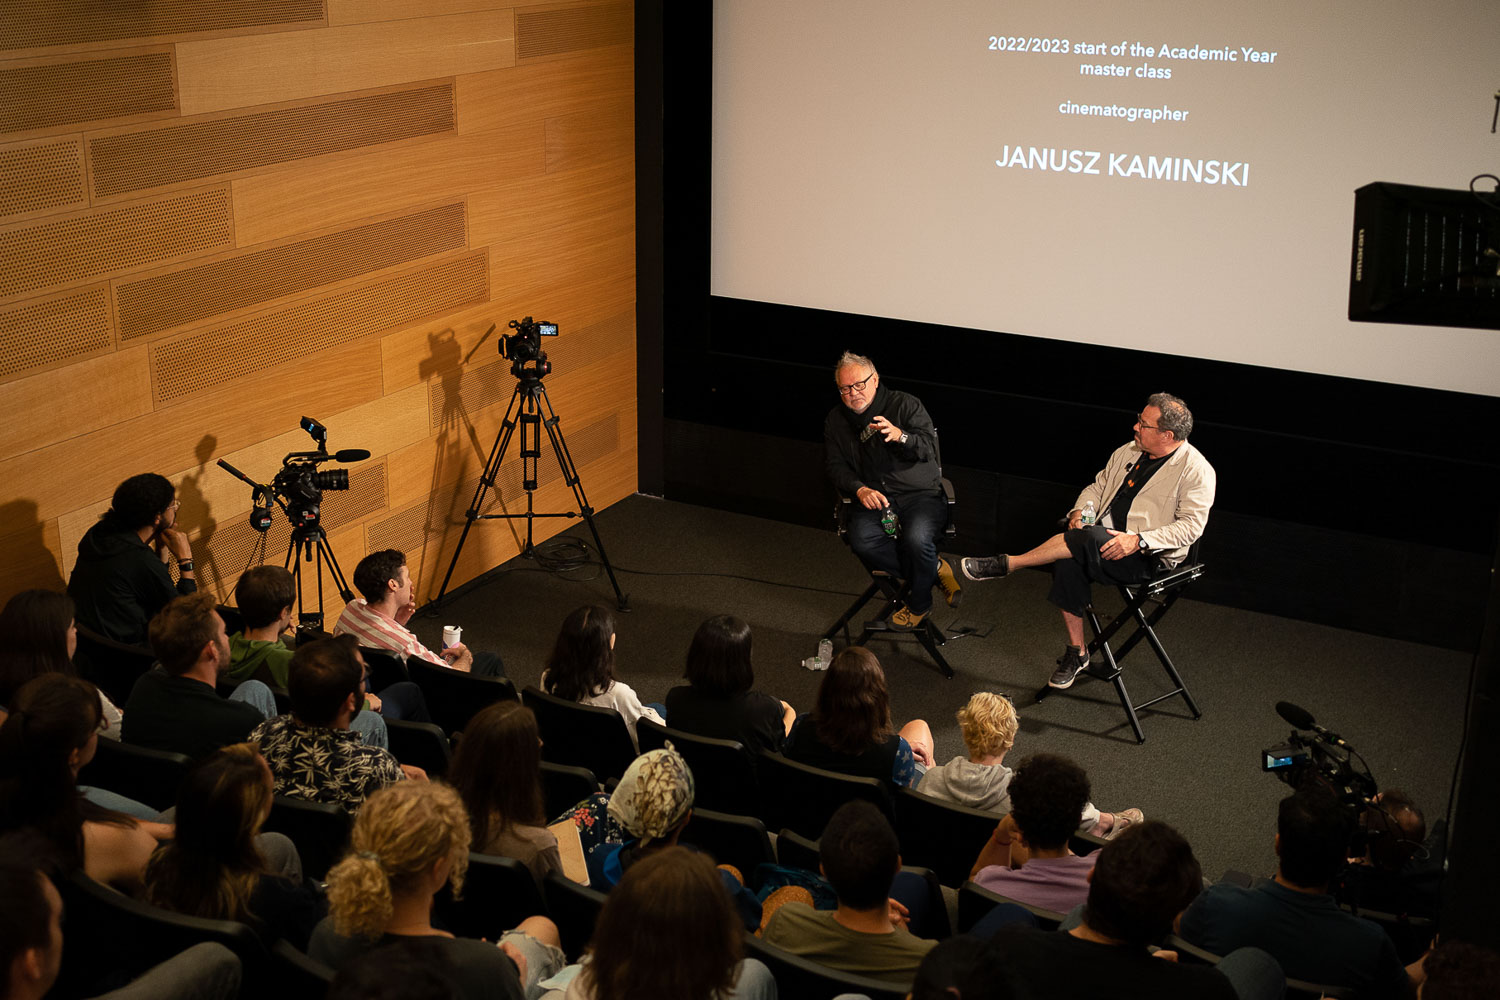 The director of the Feirstein Graduate School of Cinema Richard Gladstein (on stage, right) joins Cinematographer Janusz Kaminski at one of a series of master classes at the school.